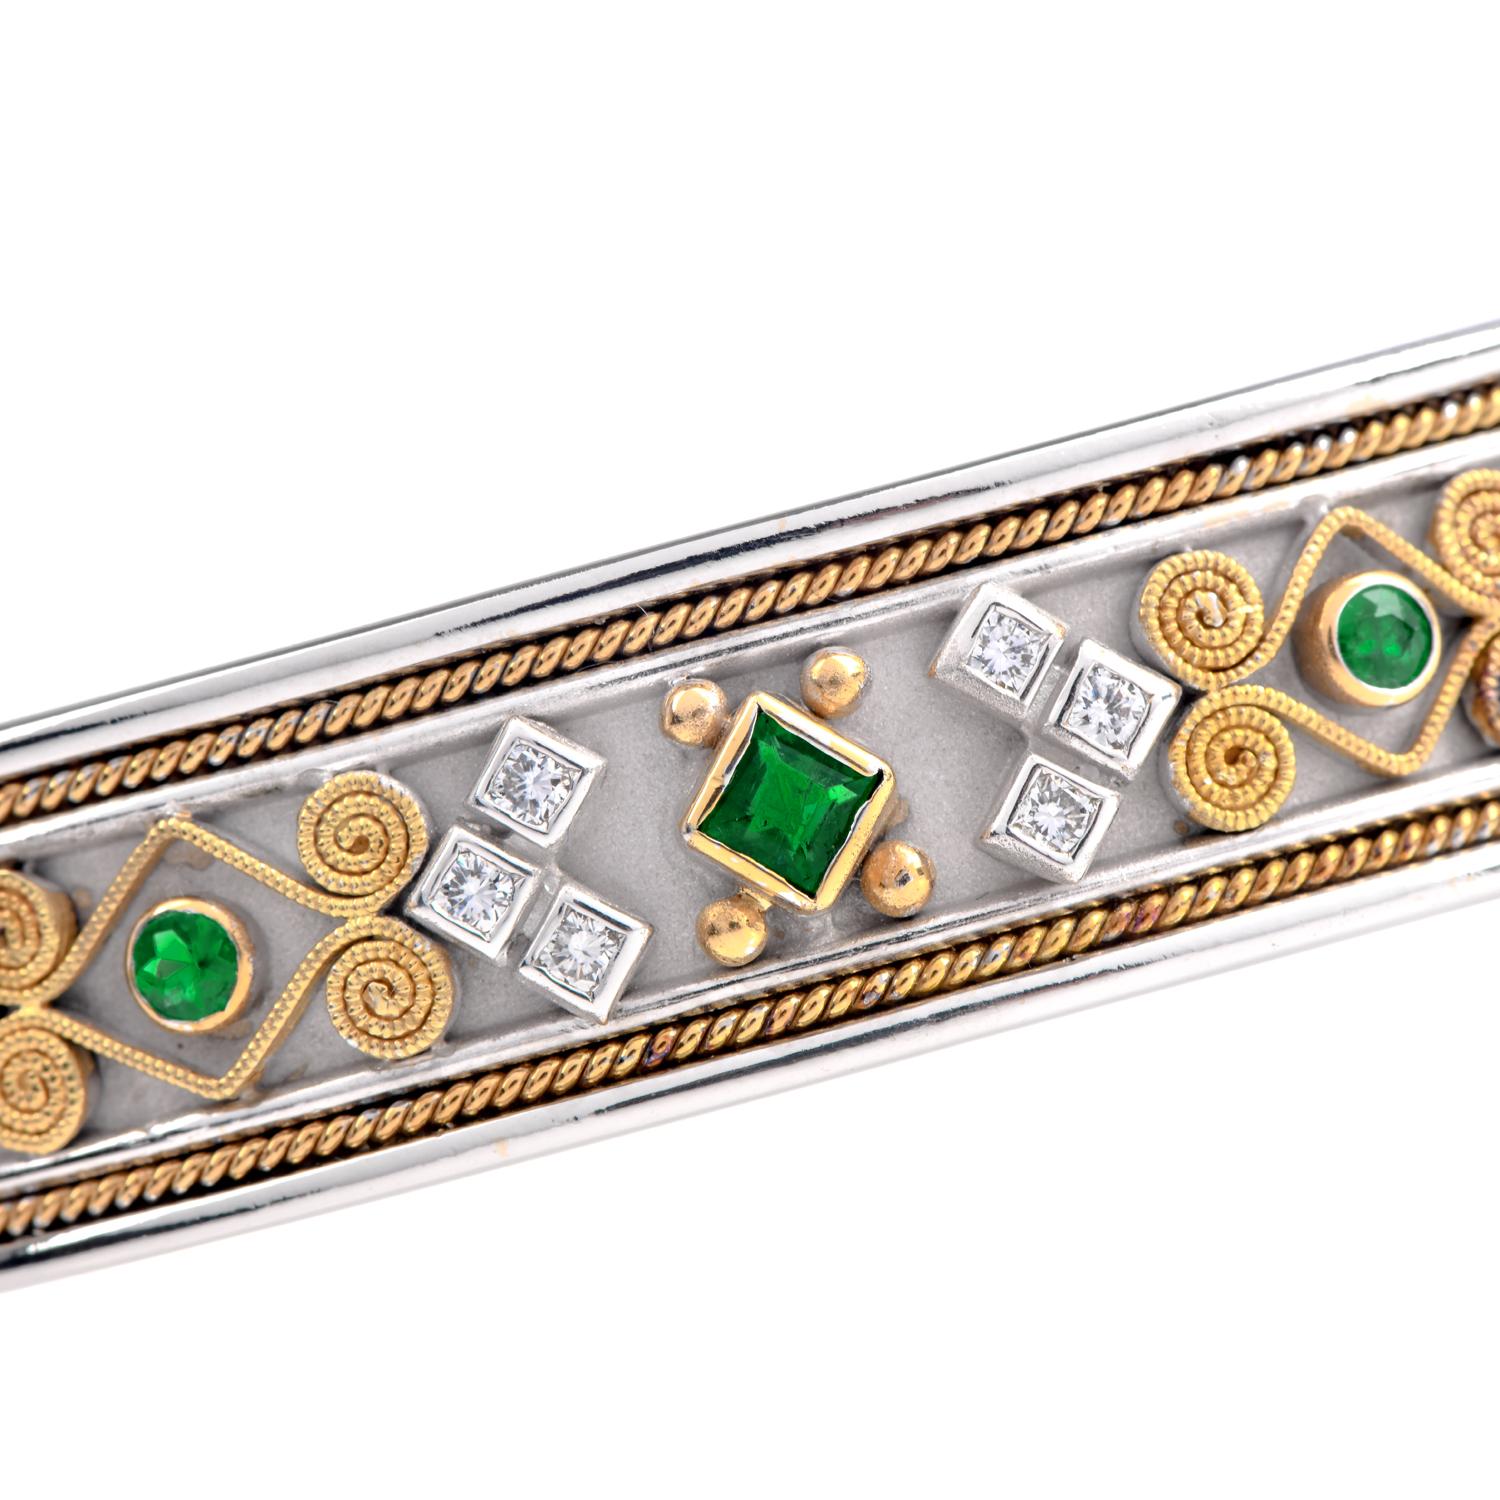 Natural Diamond and Emerald Gemstone Bangle Bracelet, hand crafted  in 18K Yellow and White Gold. Natural earth mined Diamonds and Emeralds are bezel set on a wide band with beautiful craftsmanship work all over the Satin finish bangle.

The Cuff